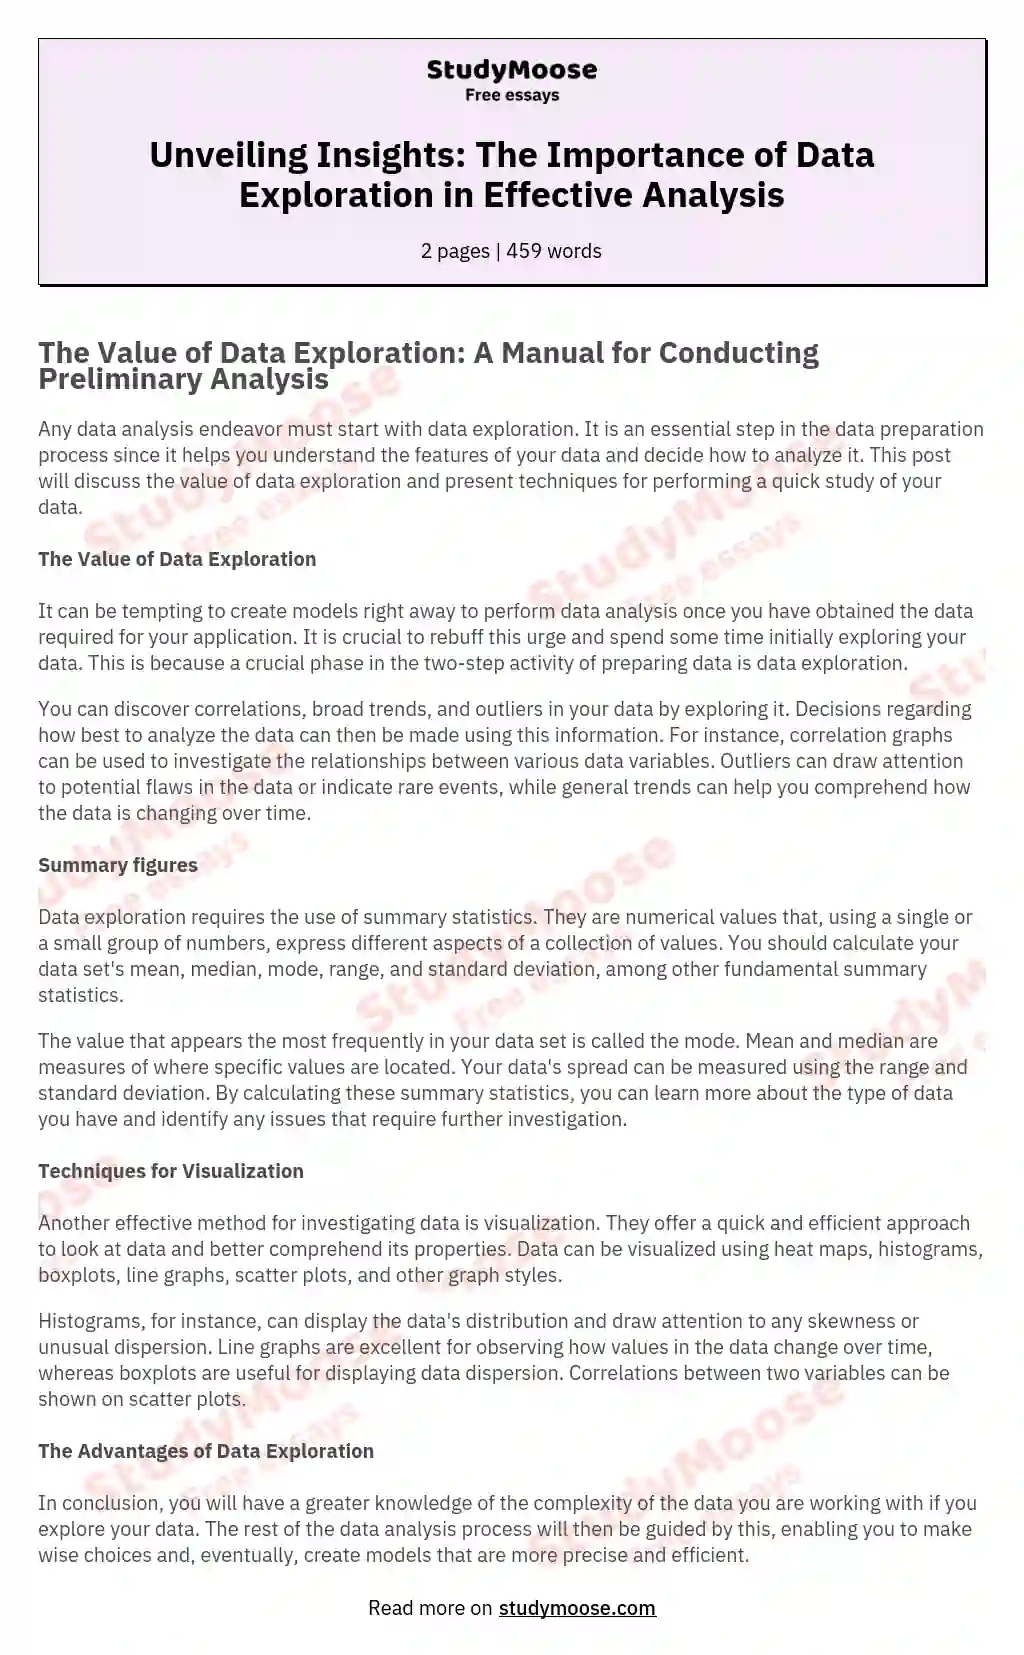 Unveiling Insights: The Importance of Data Exploration in Effective Analysis essay